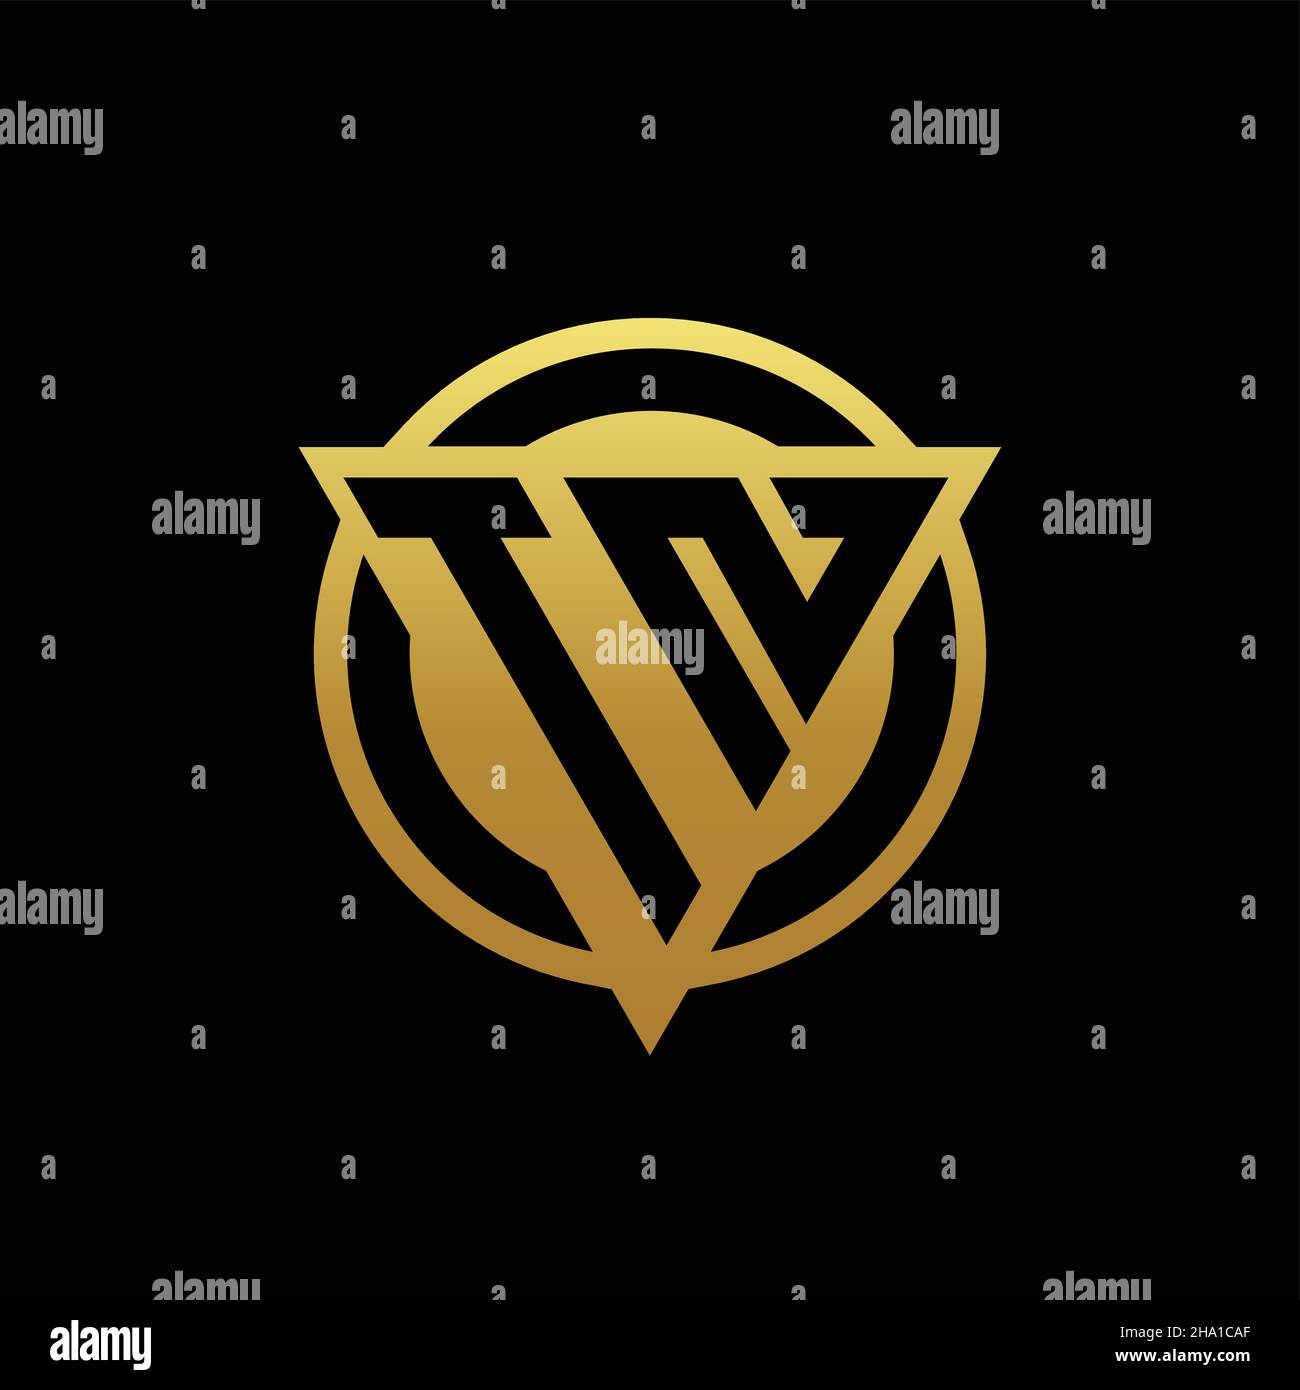 Tn logo monogram with gold colors and shield Vector Image